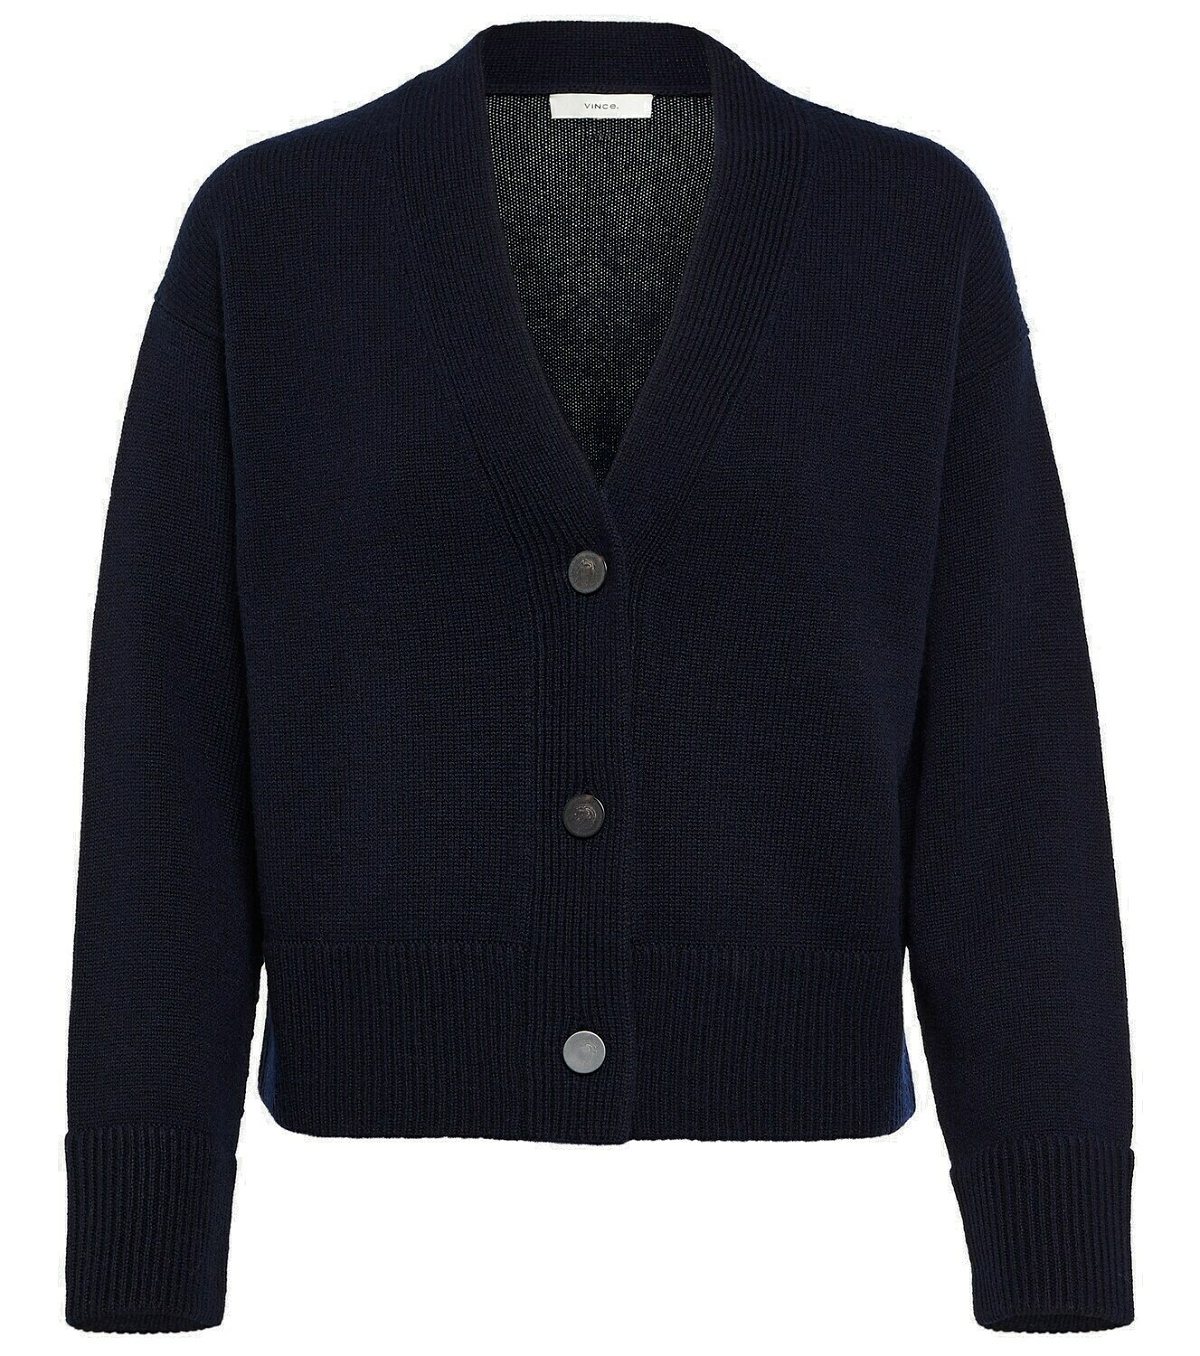 Vince Wool and cashmere cardigan Vince